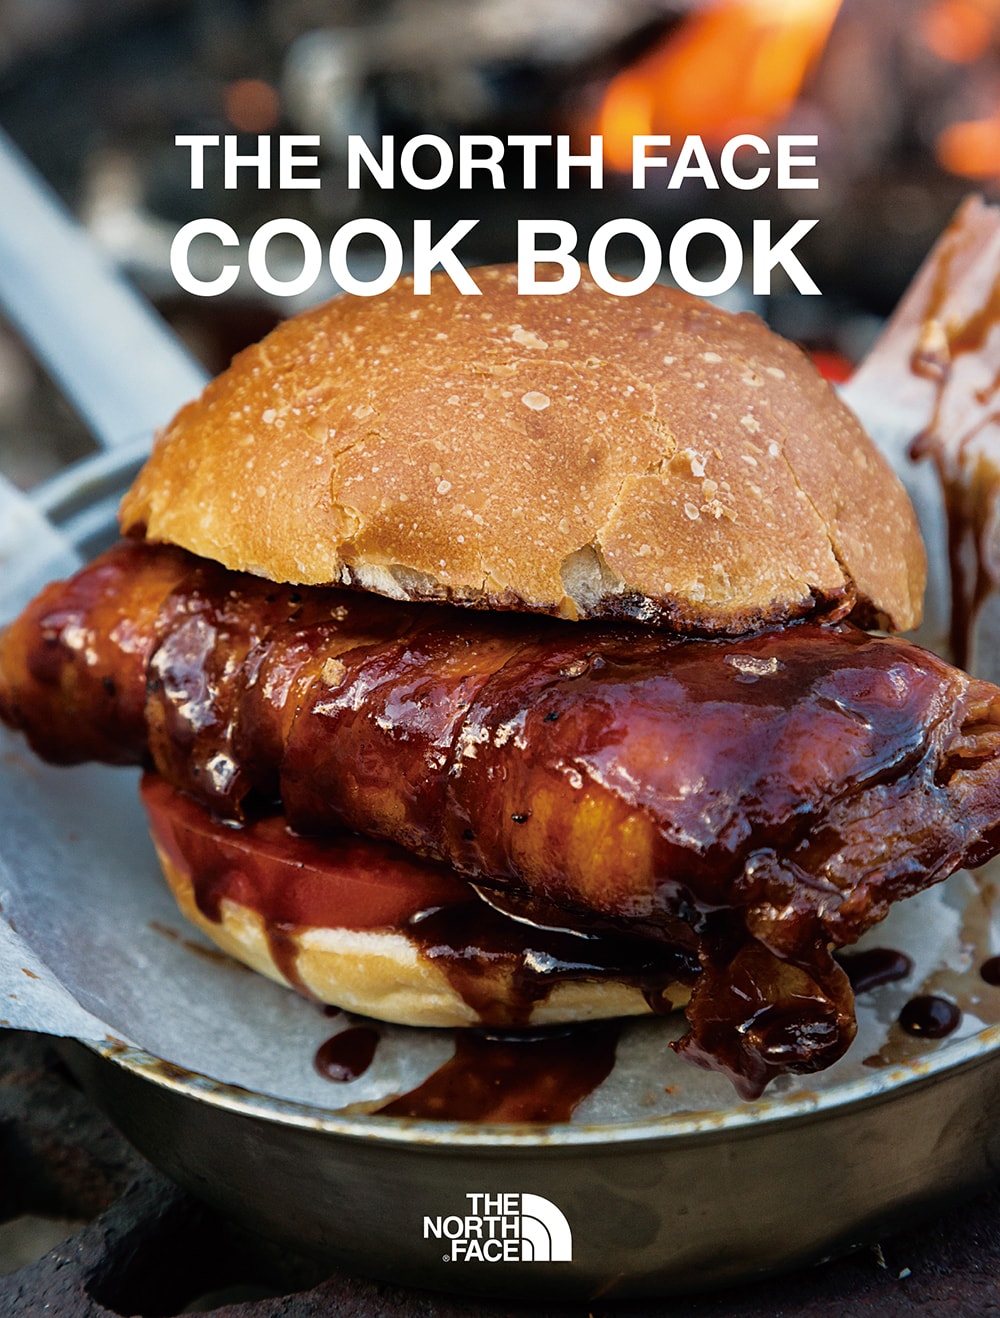 THE NORTH FACE COOK BOOK